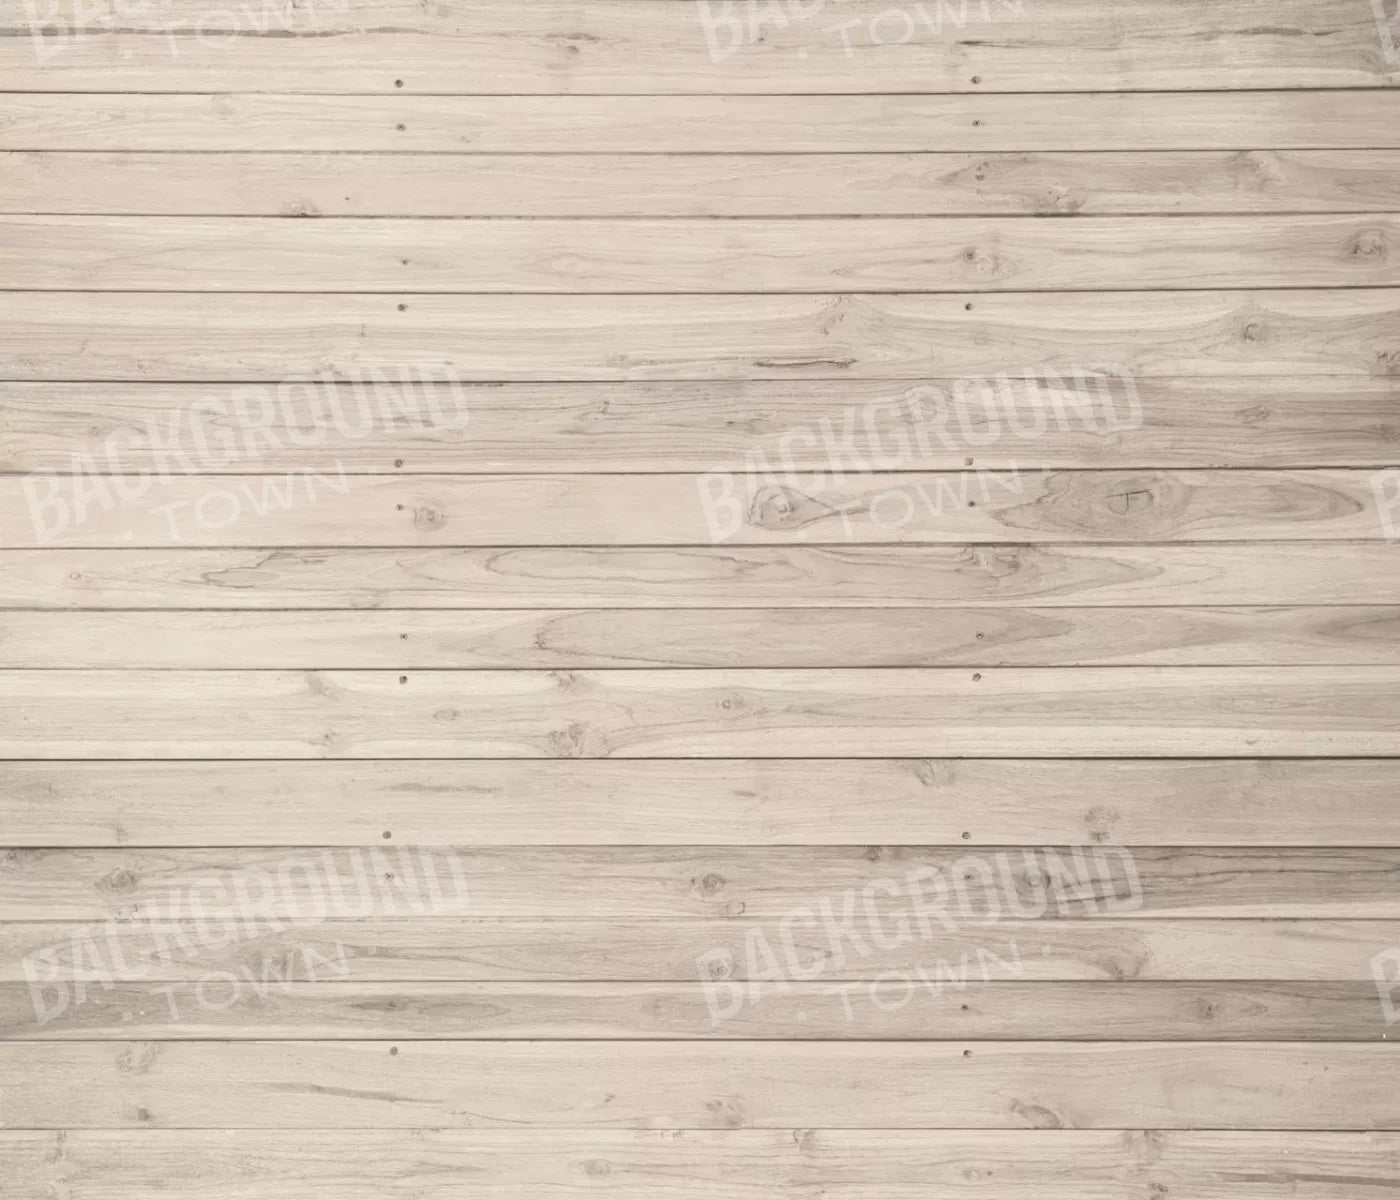 Wood Plank Washed 12X10 Ultracloth ( 144 X 120 Inch ) Backdrop